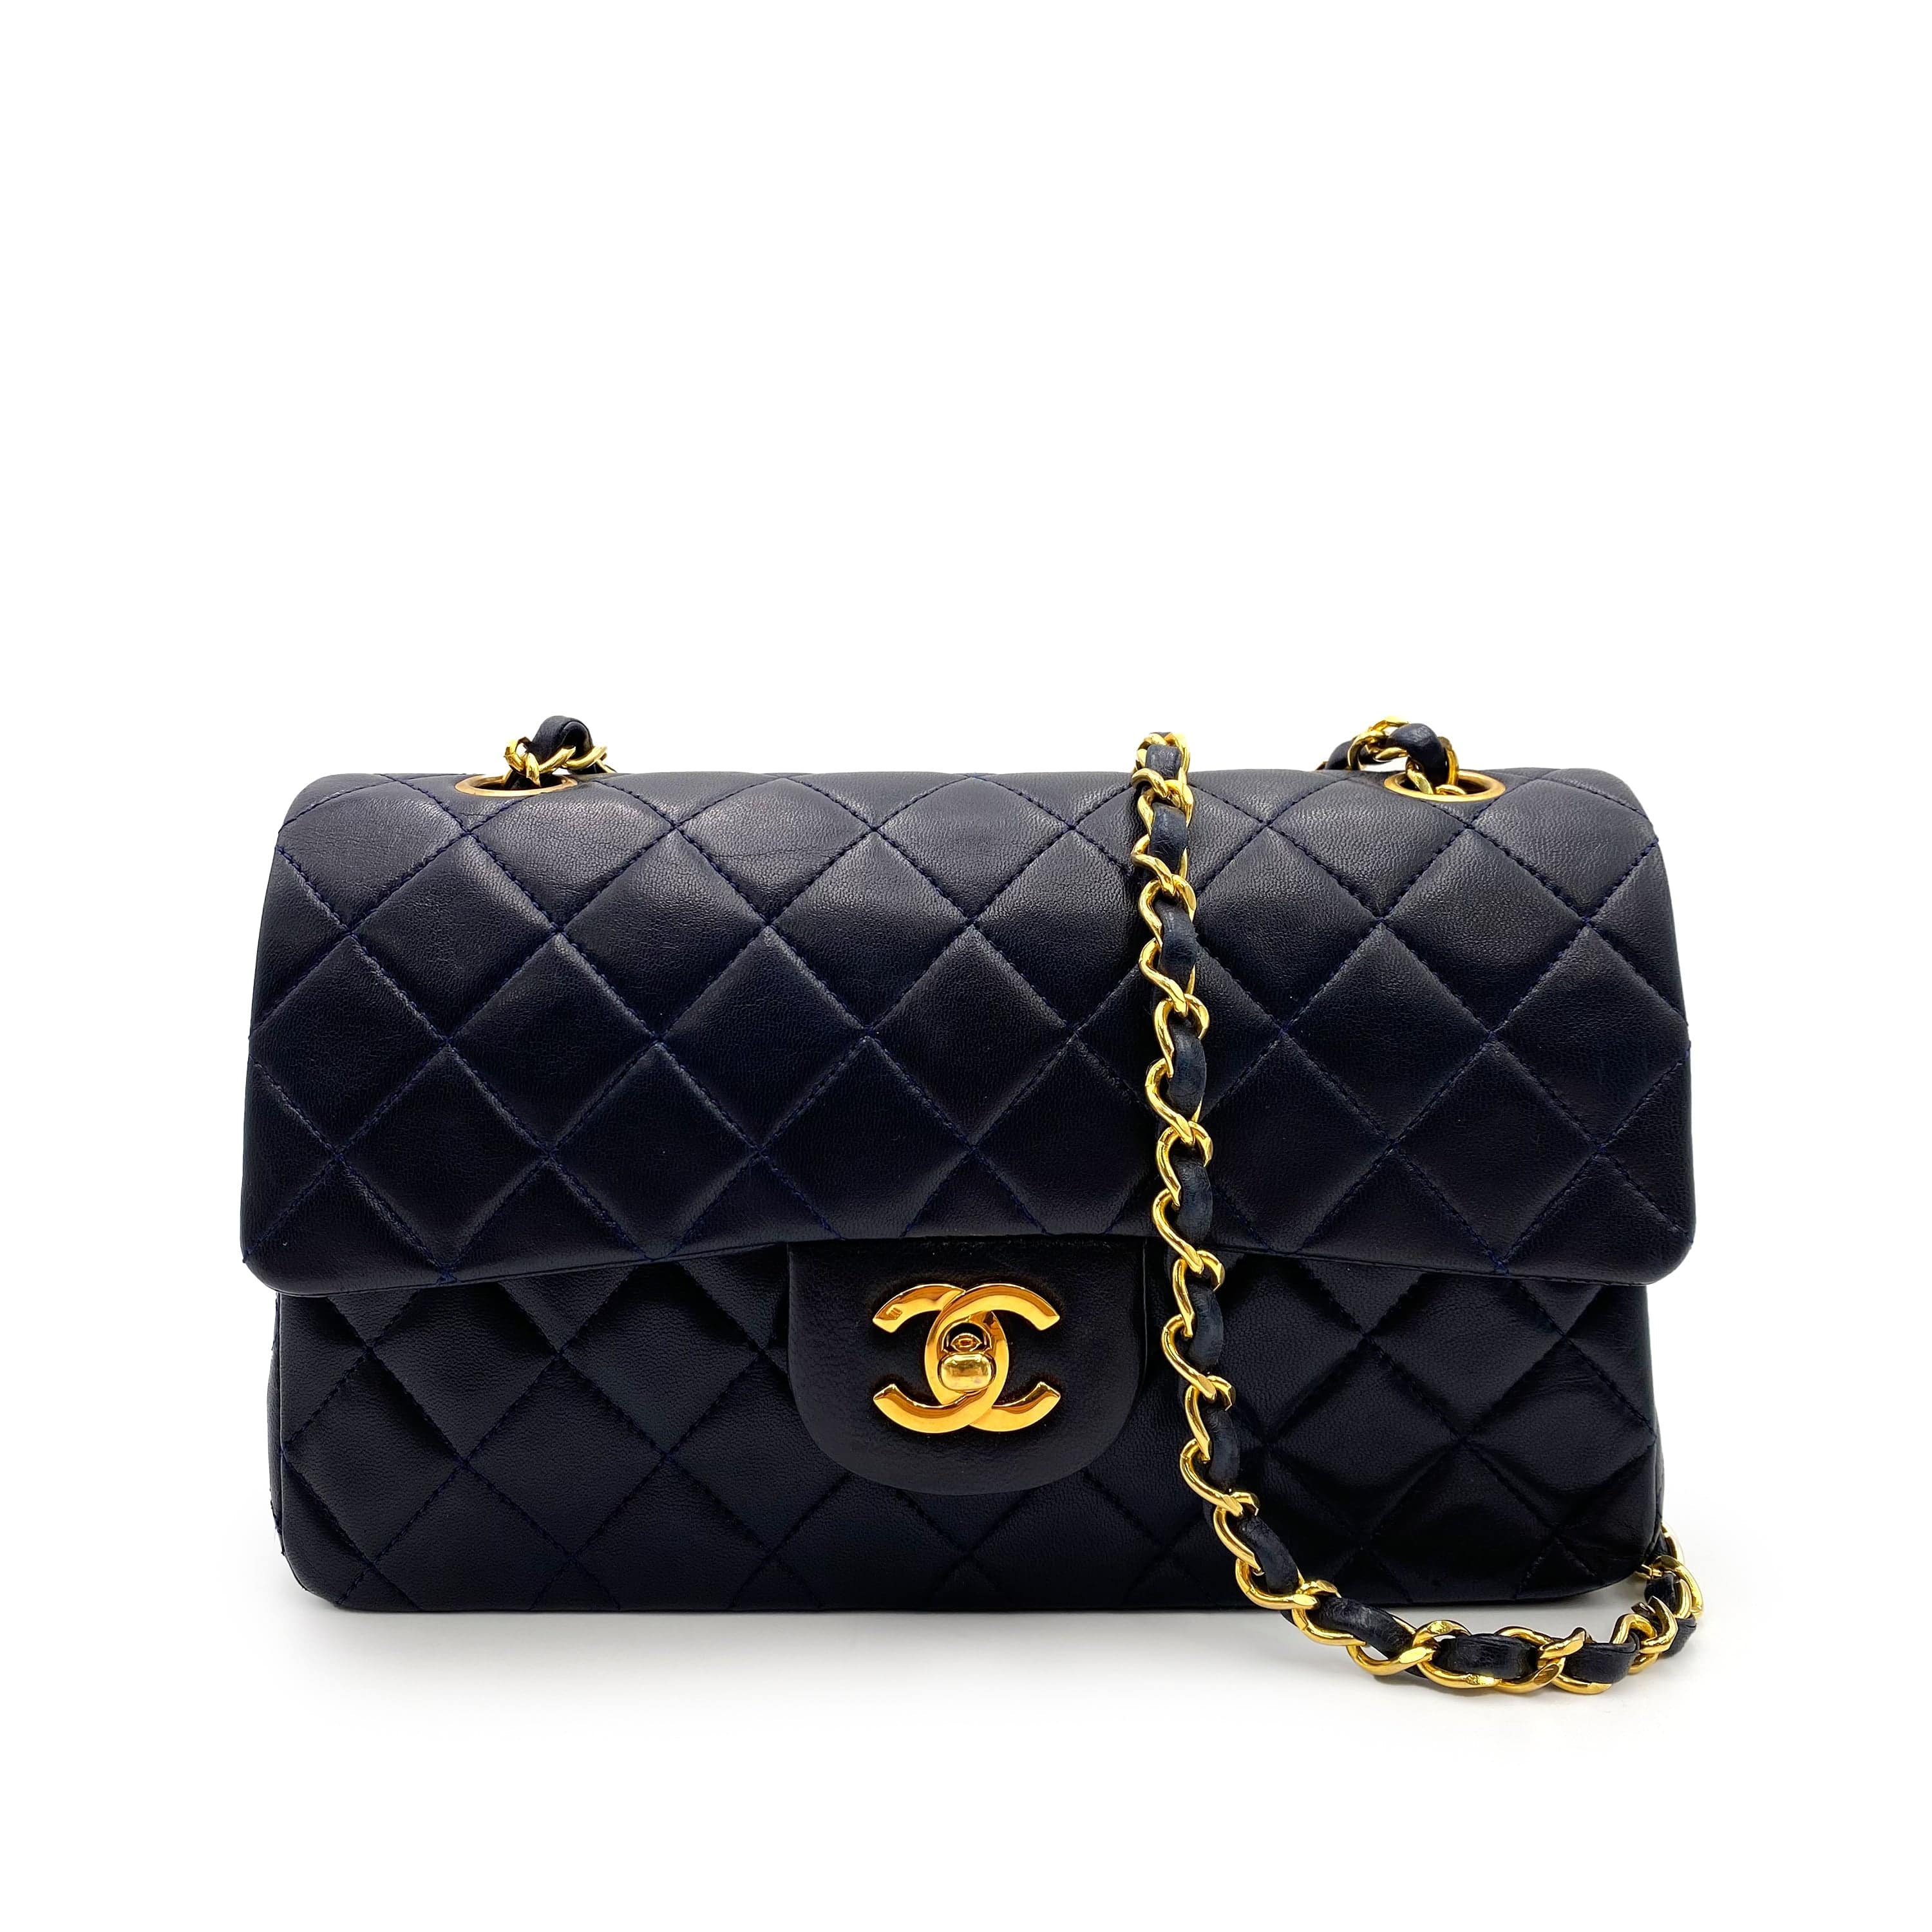 Chanel CHANEL VINTAGE CLASSIC FLAP SMALL CHAIN SHOULDER BAG NAVY LAMB SKIN 90228461